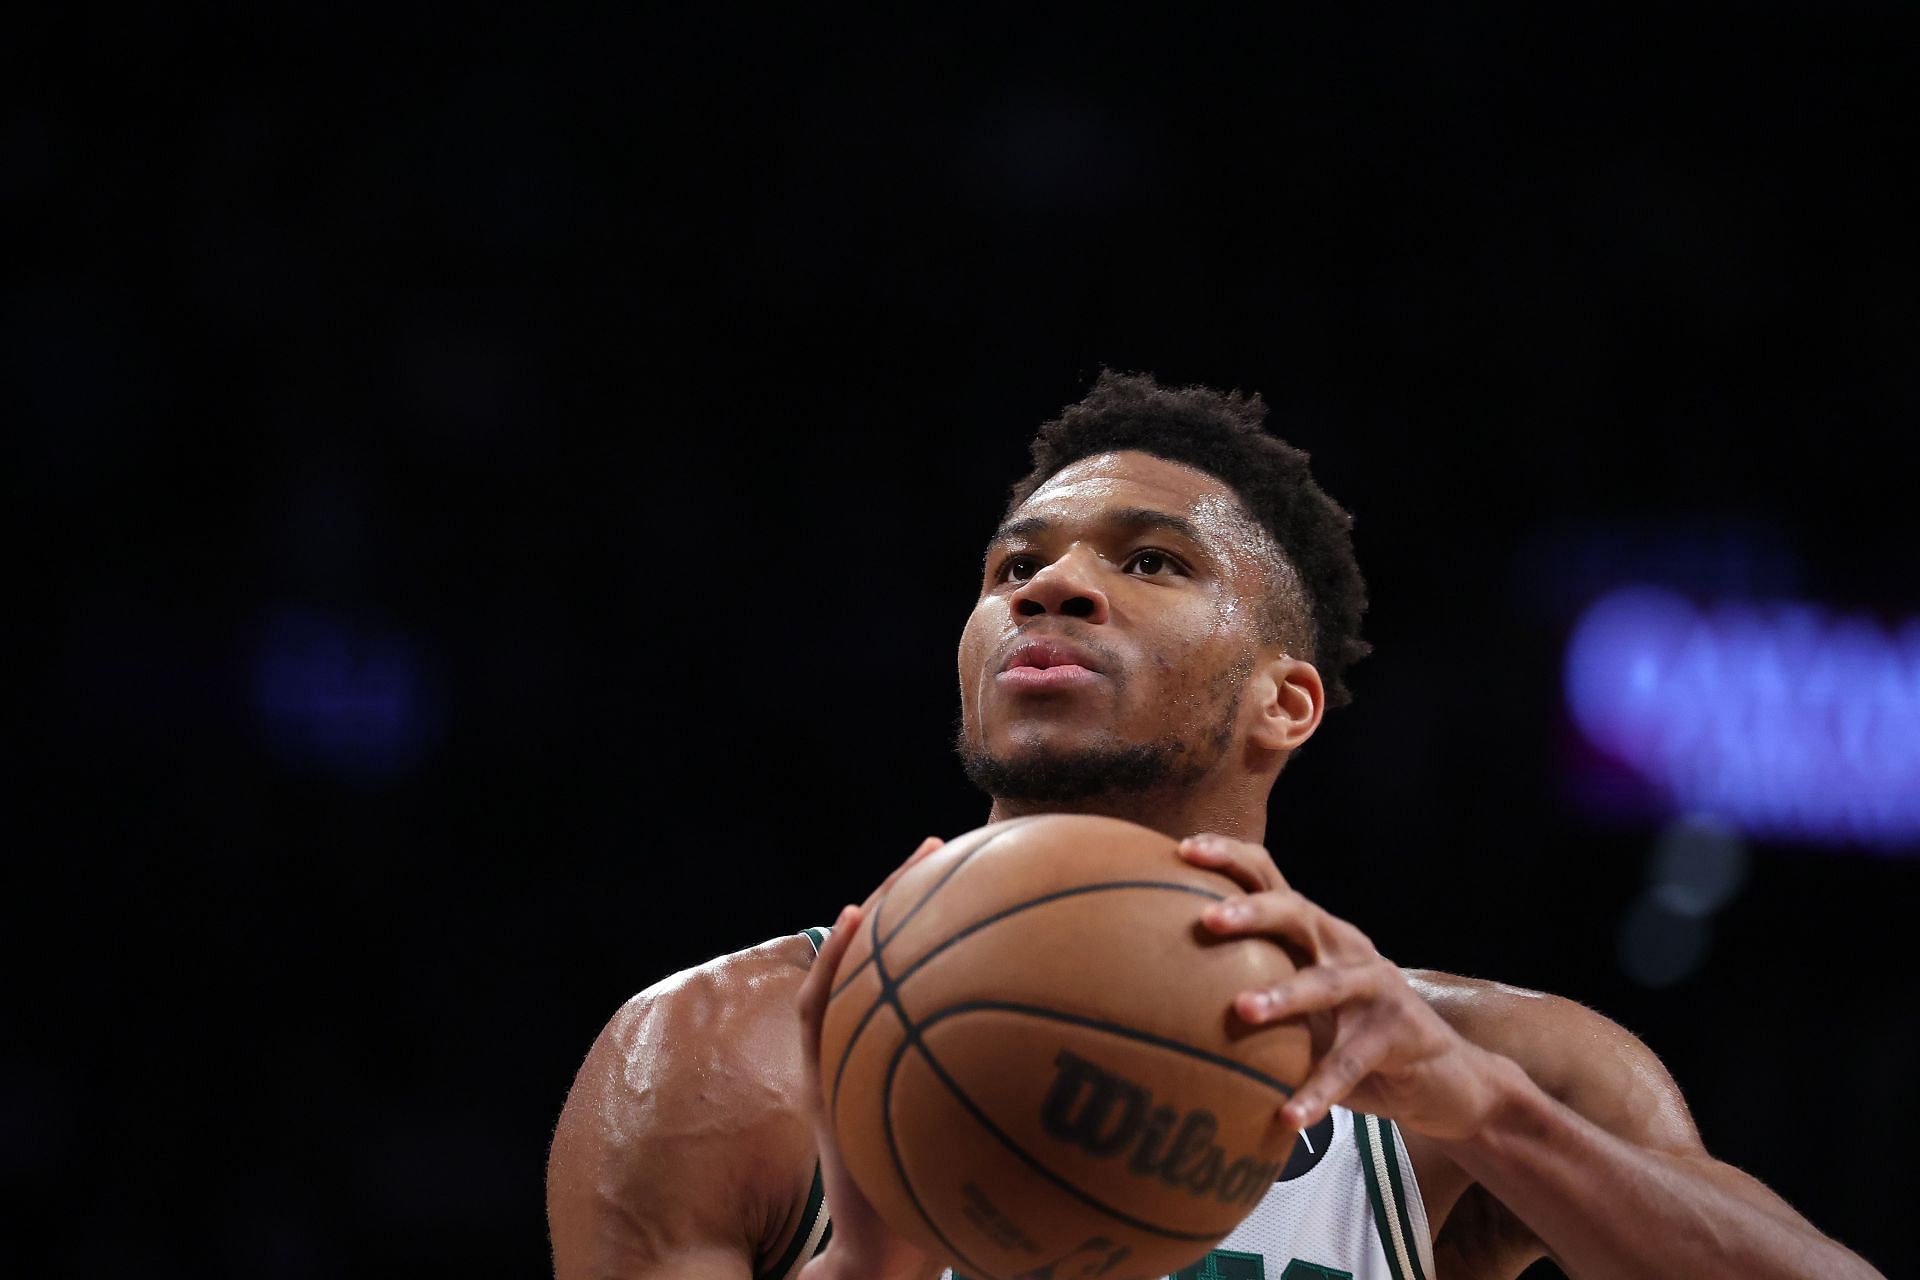 Giannis Antetokounmpo against the Brooklyn Nets